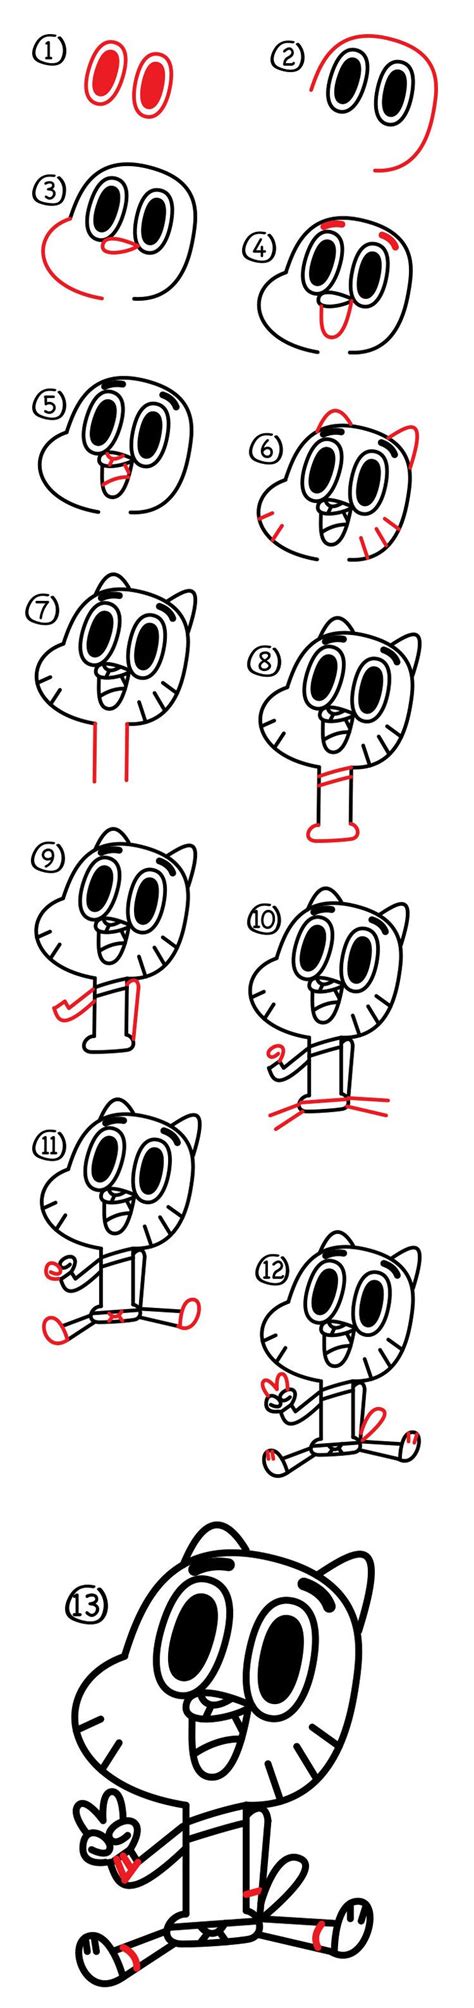 How To Draw Gumball Step By Step Fievour Witteorsell